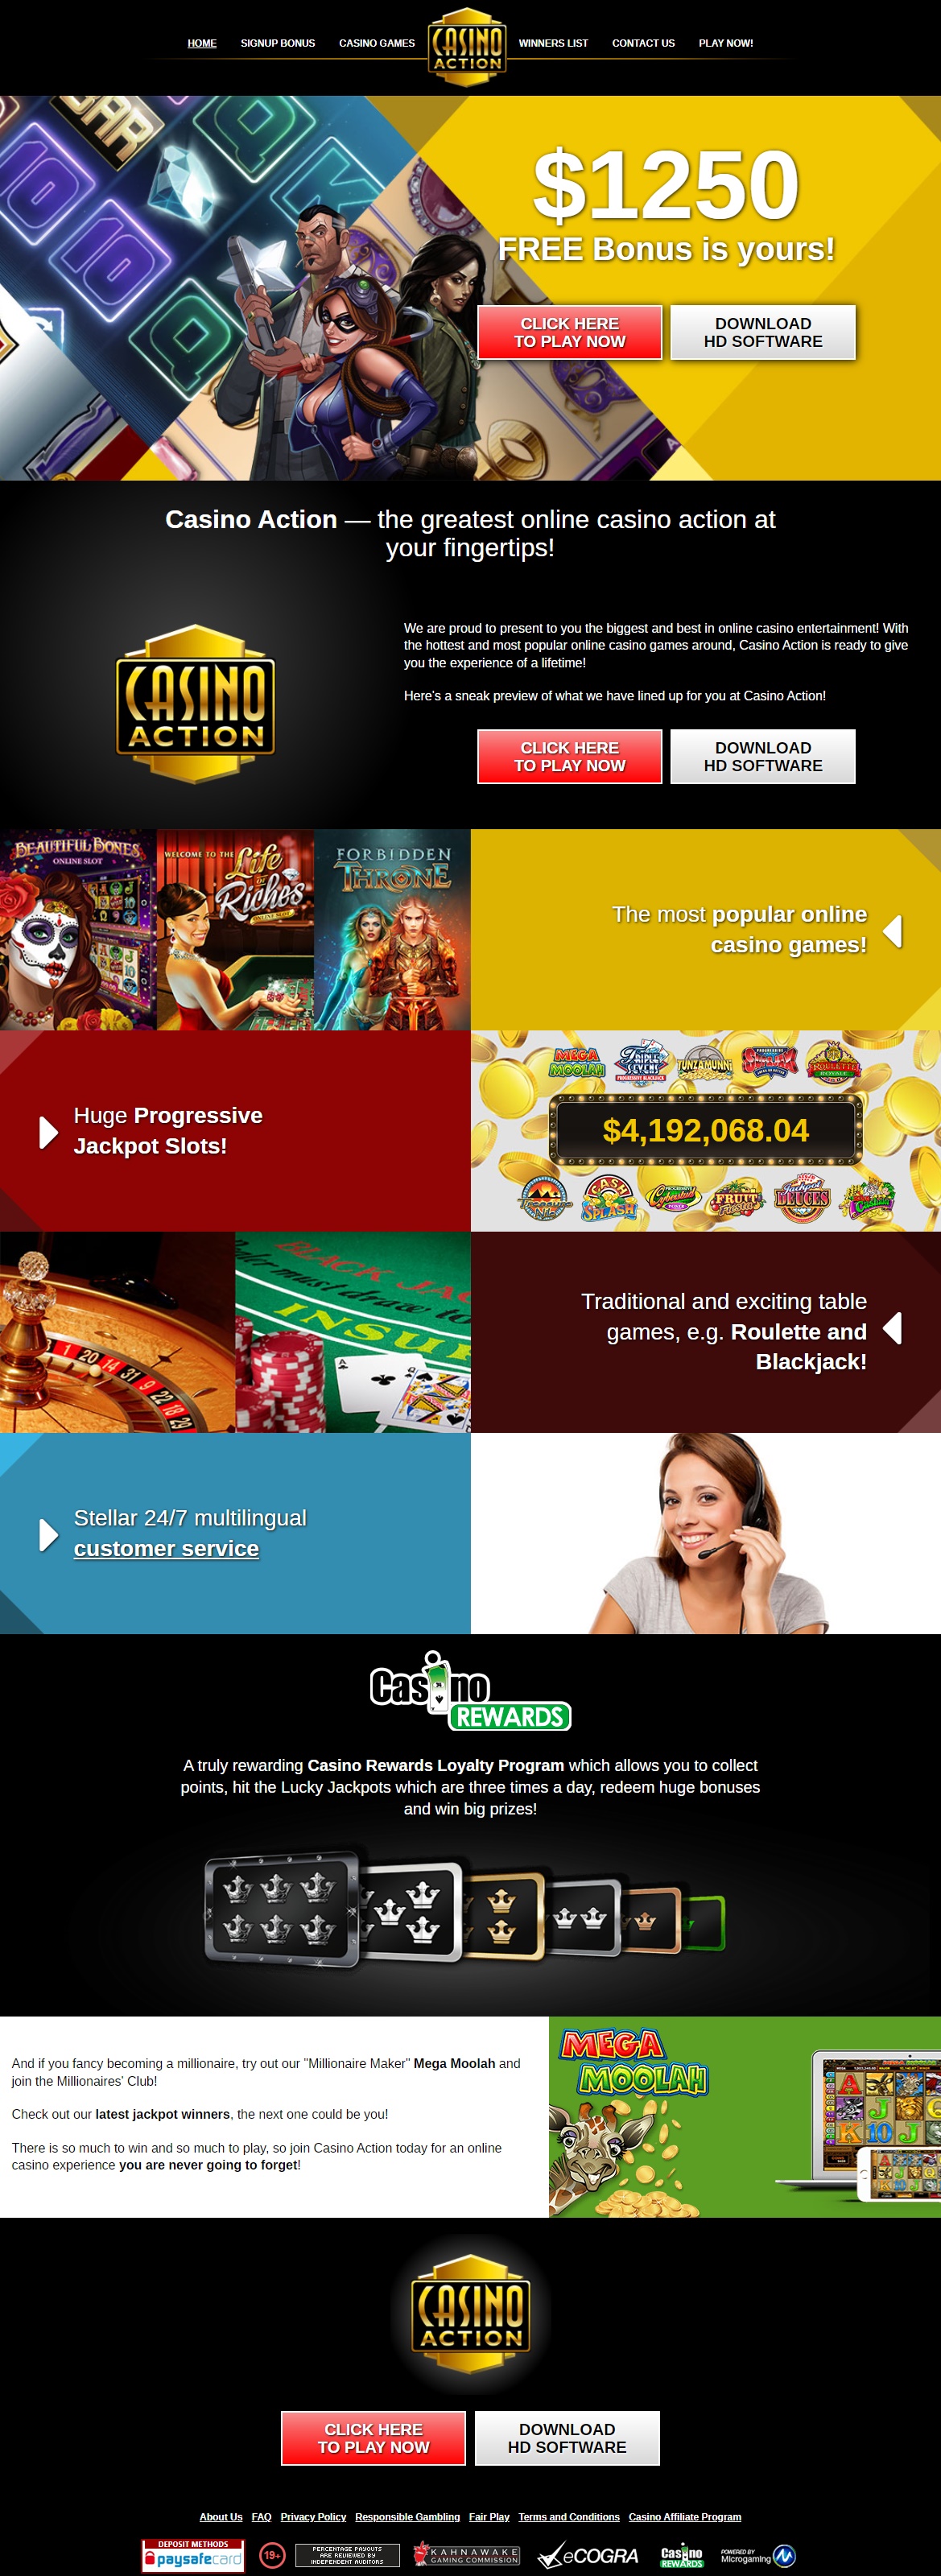 They are proud to present to you the biggest and best in online casino entertainment! With the hottest and most popular online casino games around, Casino Action is ready to give you the experience of a lifetime! Here's a sneak preview of what they have lined up for you at Casino Action! And if you fancy becoming a millionaire, try out their 